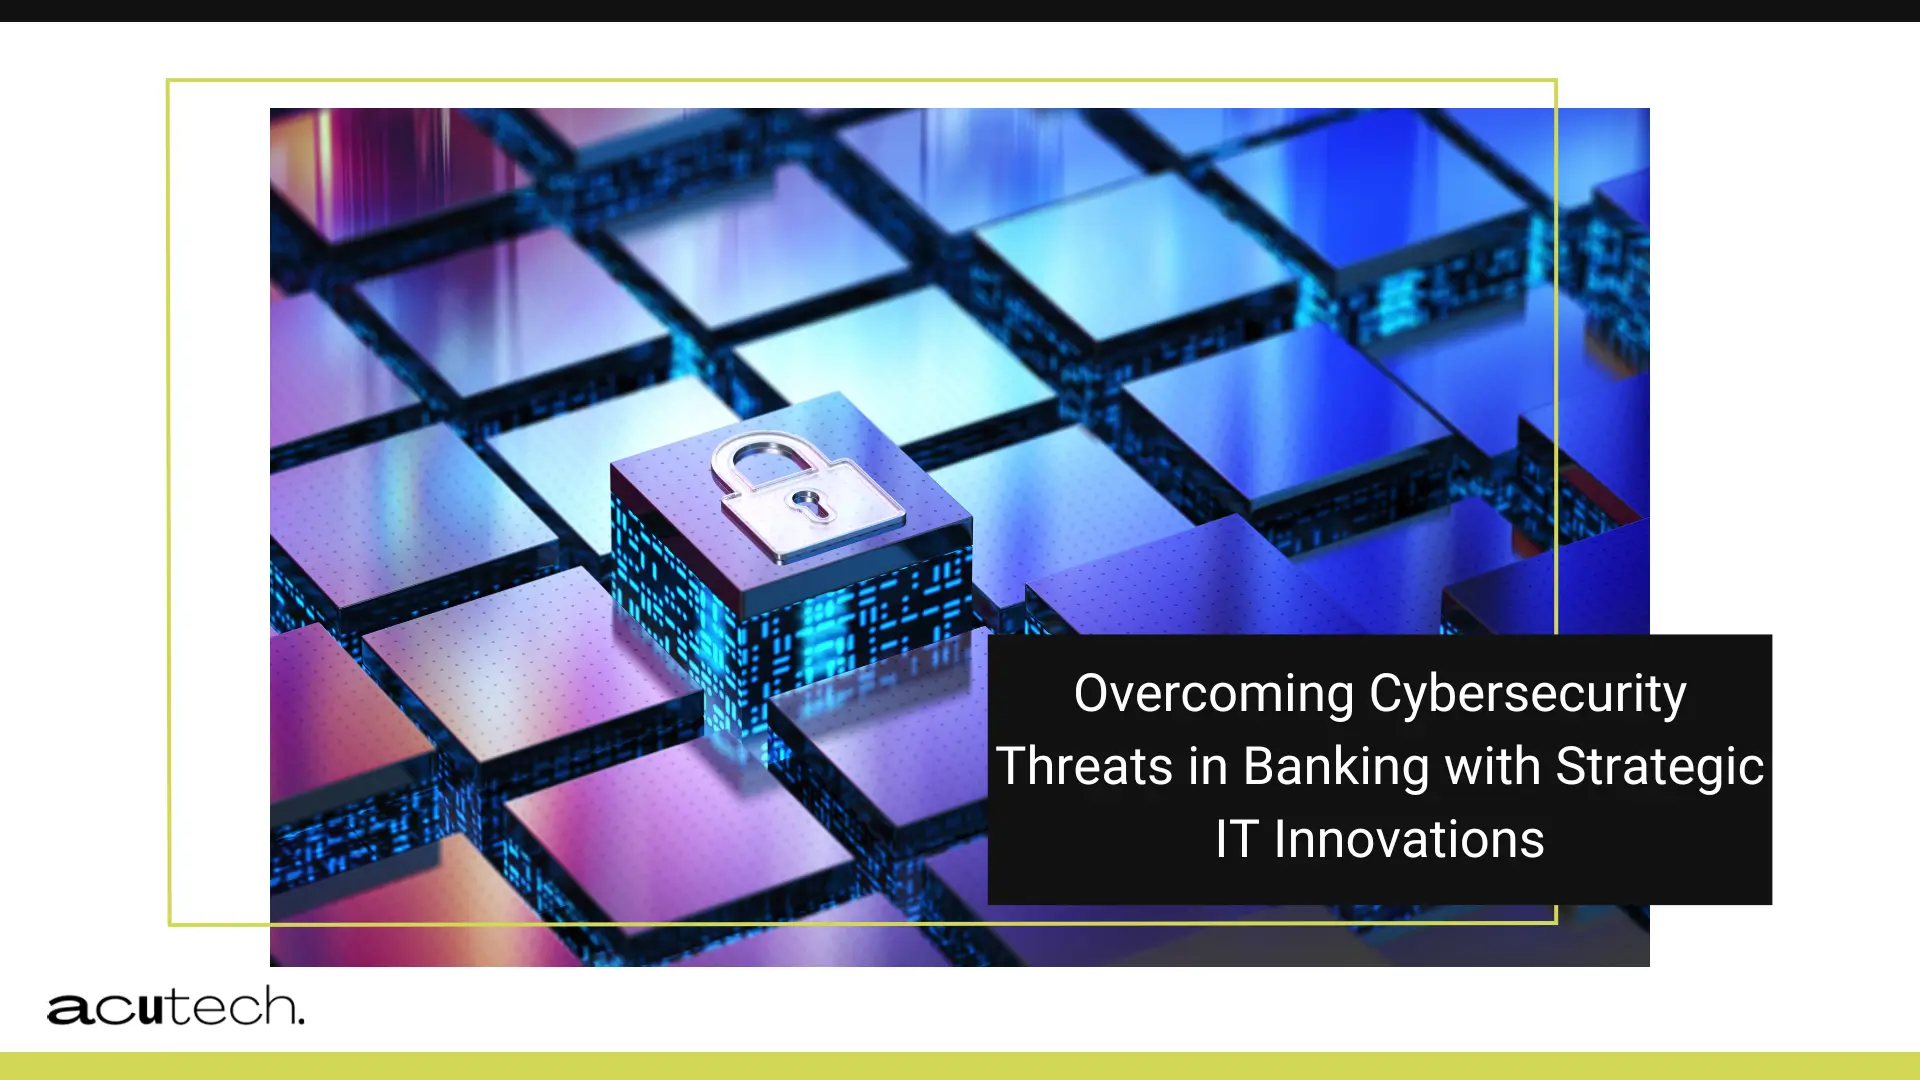 Overcoming Cybersecurity Threats in Banking with Strategic IT Innovations